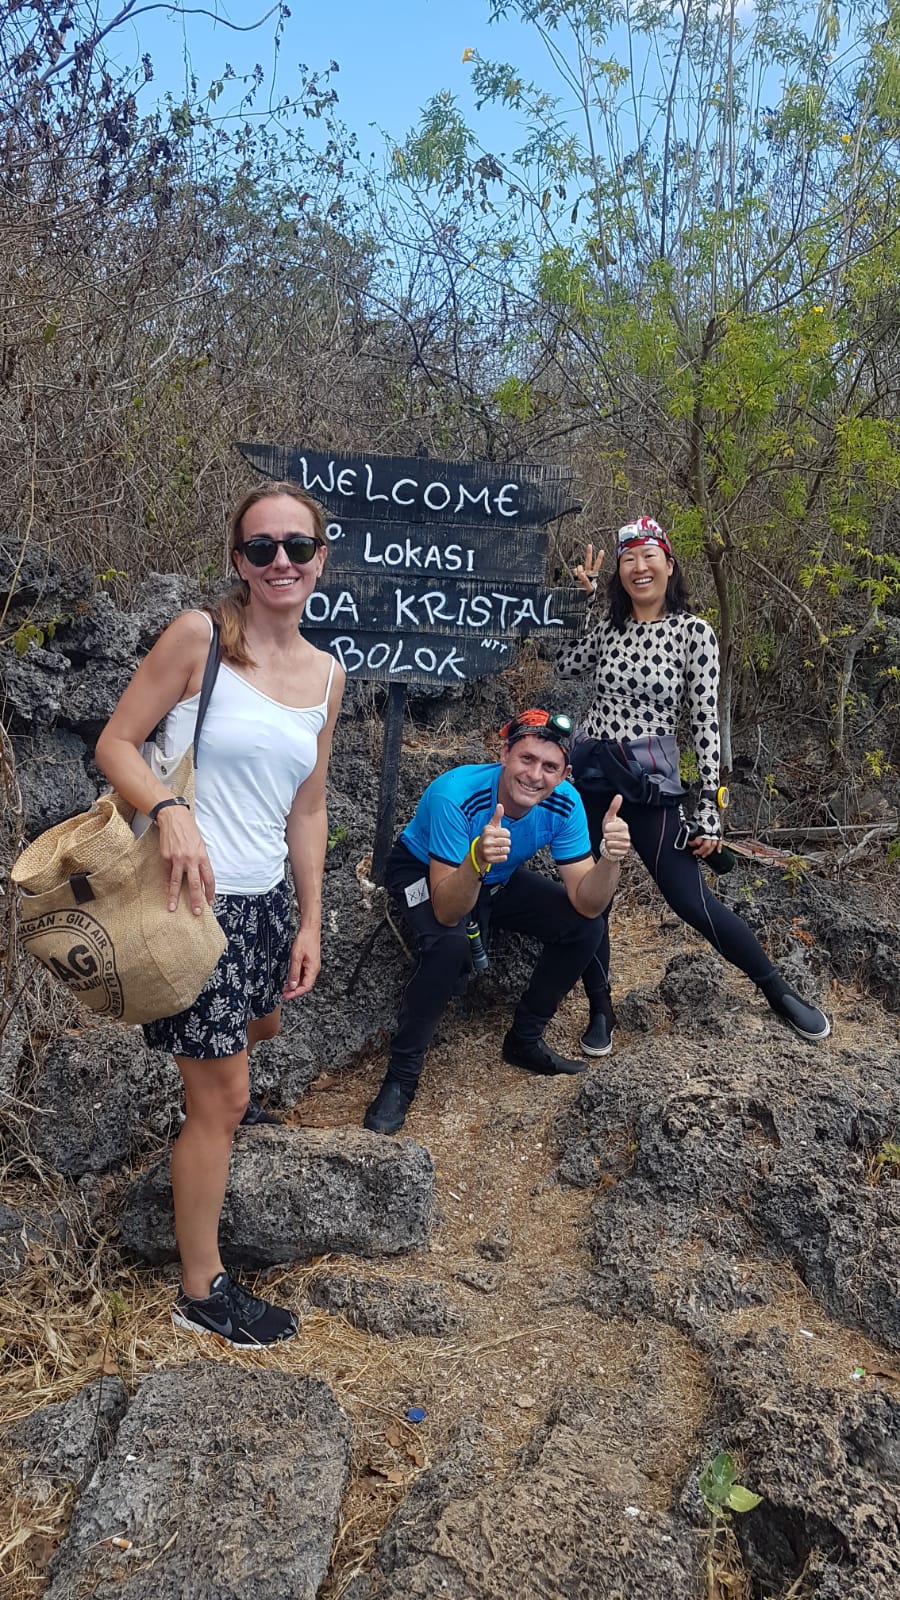 kristal cave welcome sign in kupang